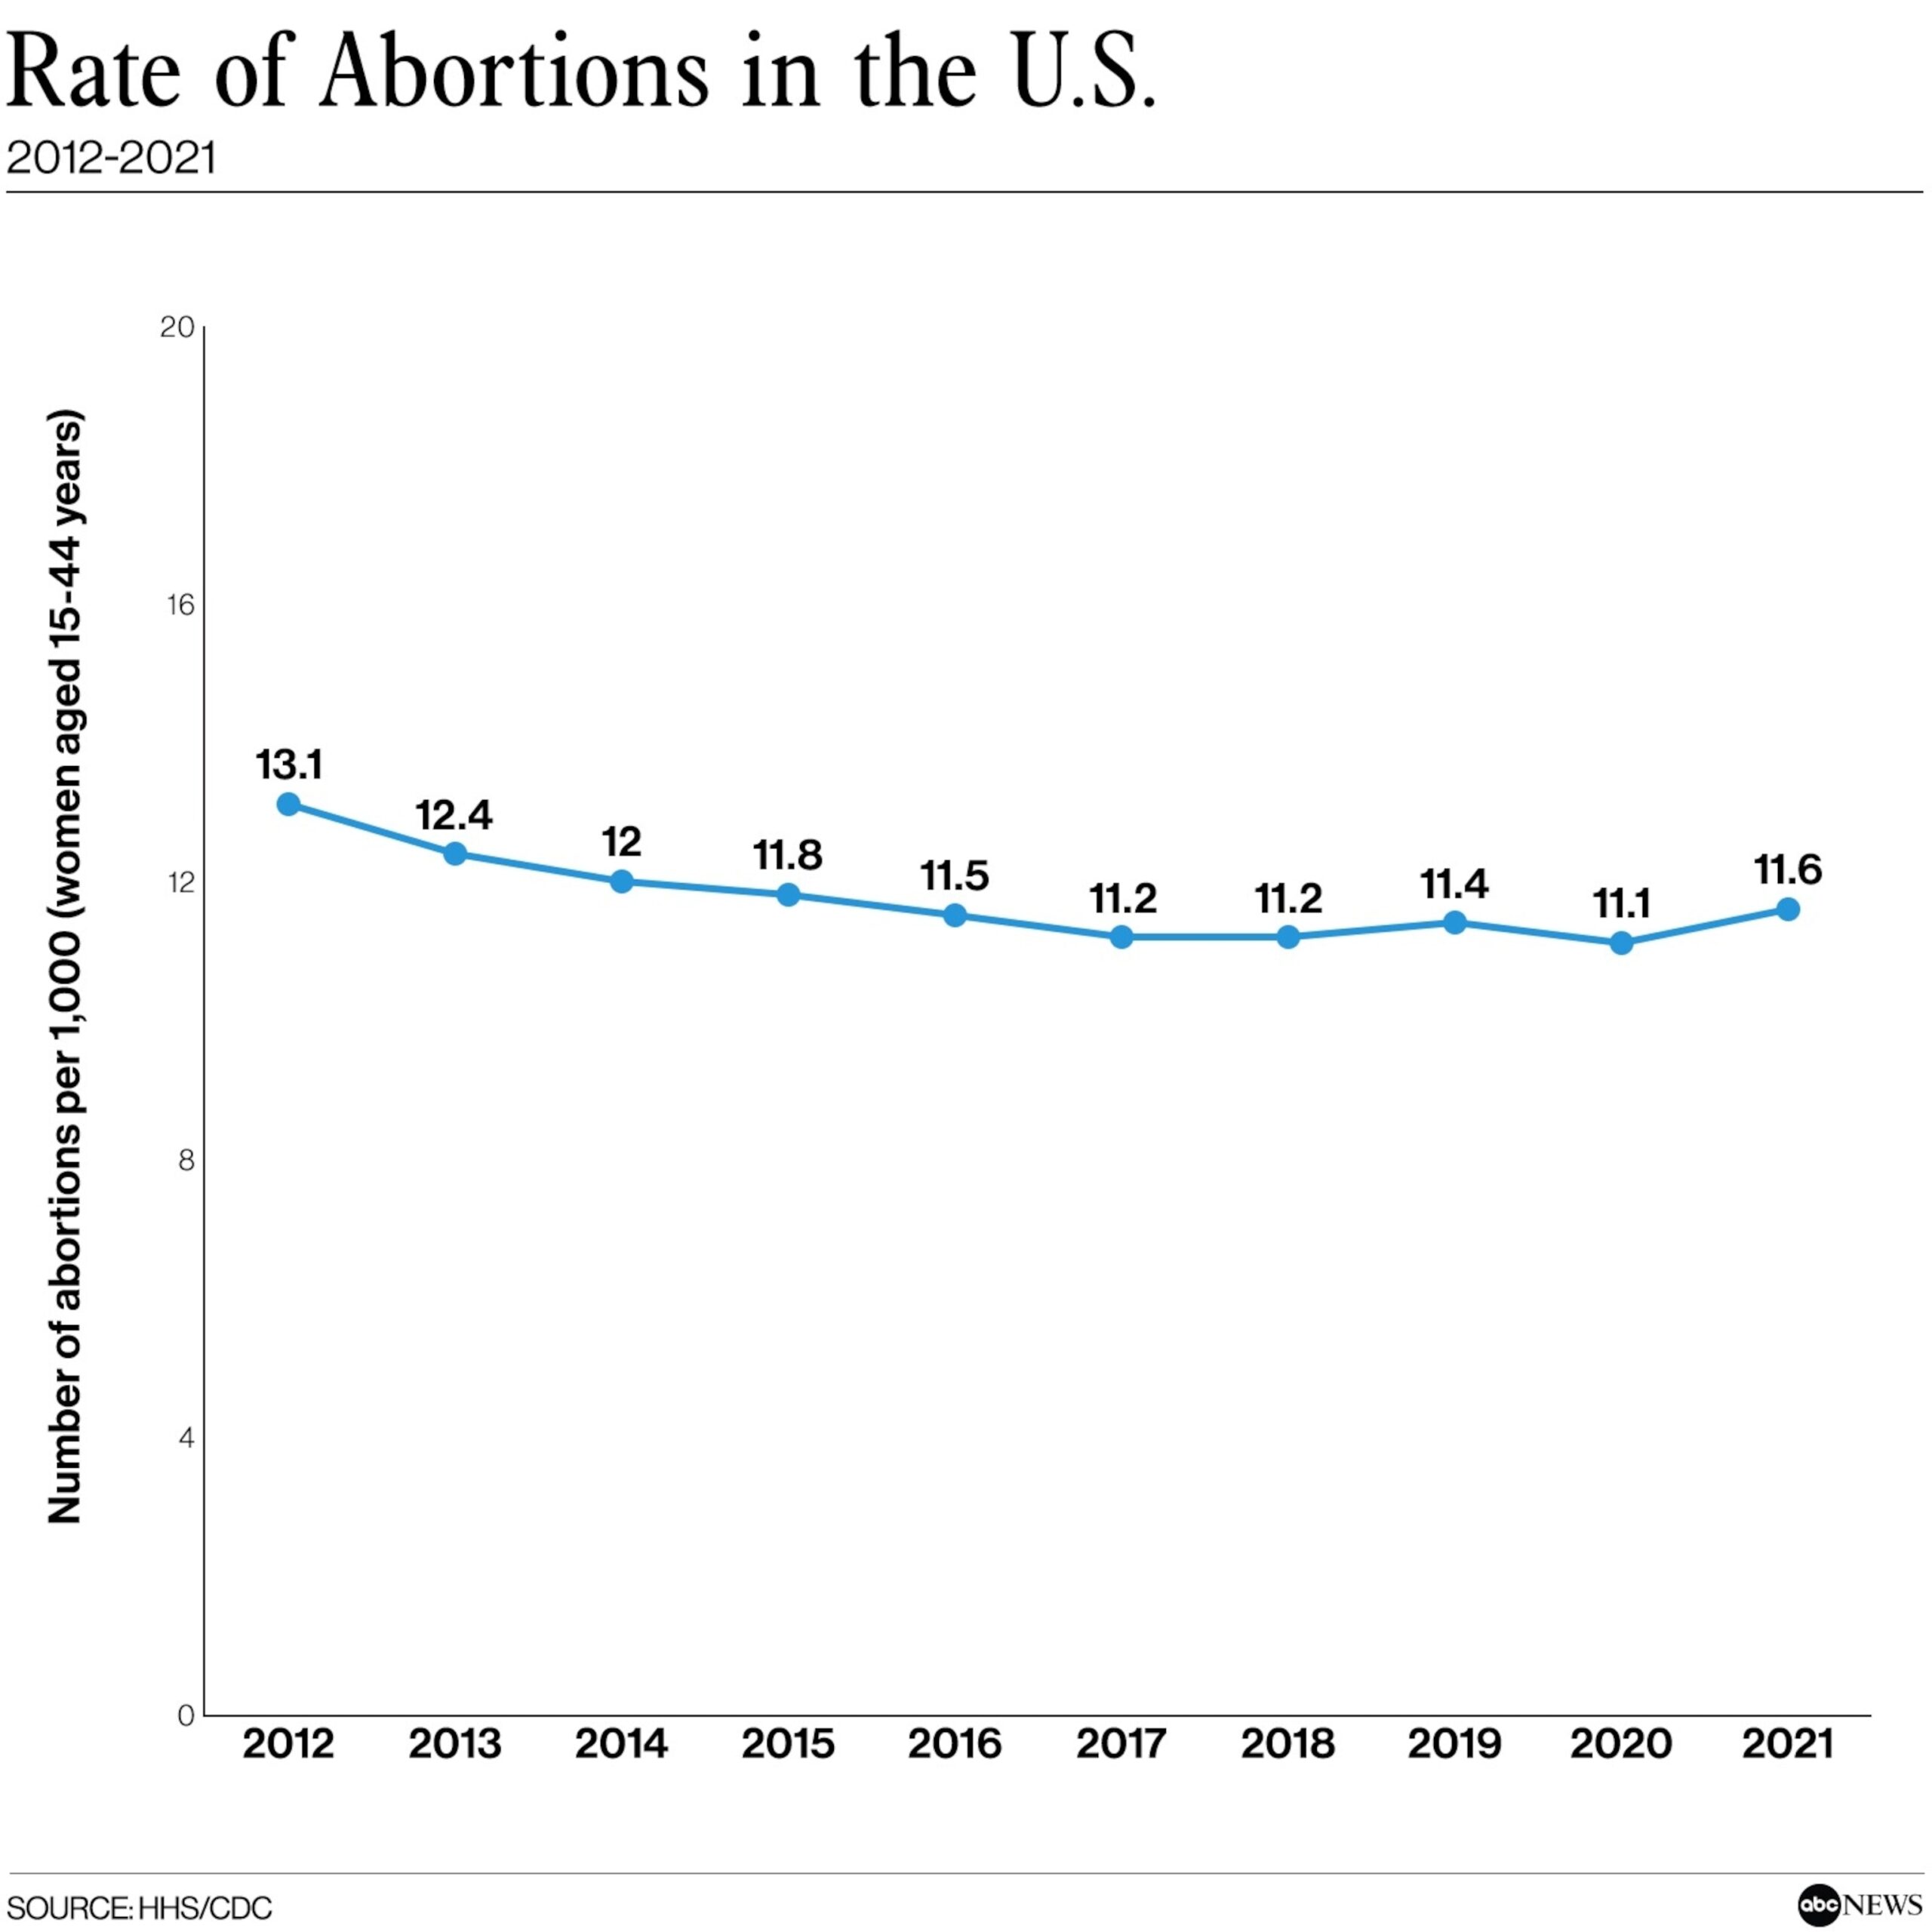 PHOTO: Number of abortions per 1,000 (women aged 15-44 years)